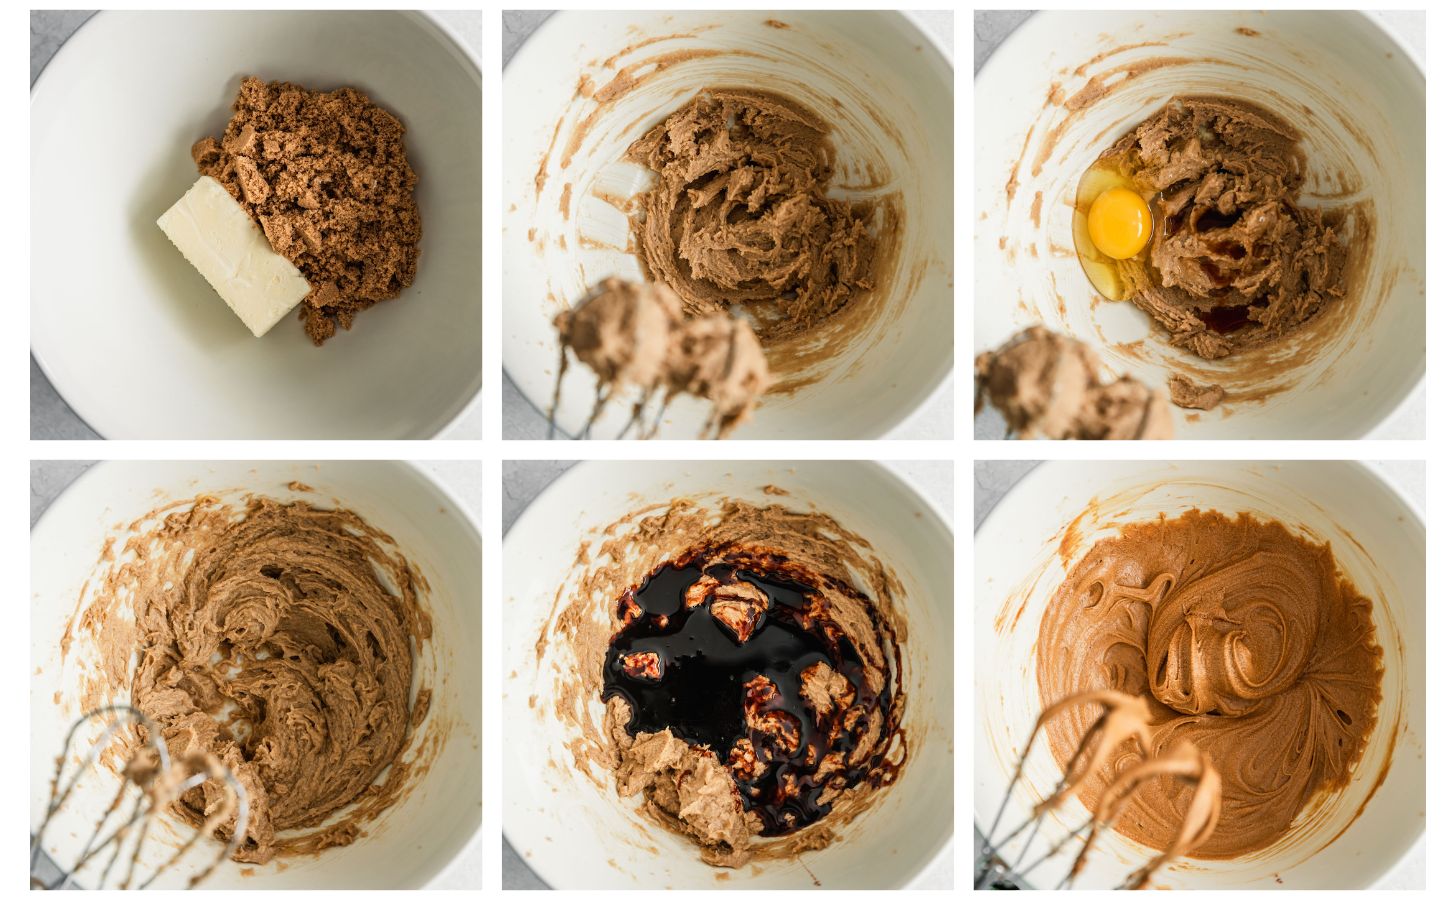 Three steps to mixing cookie dough. In photo 1, butter and brown sugar are in a white bowl. In photo 2, the mixture is creamed. In photo 3, the bowl has an egg in it. In photo 4, the egg is mixed in. In photo 5, molasses is in the bowl. In photo 6, the dough is combined.